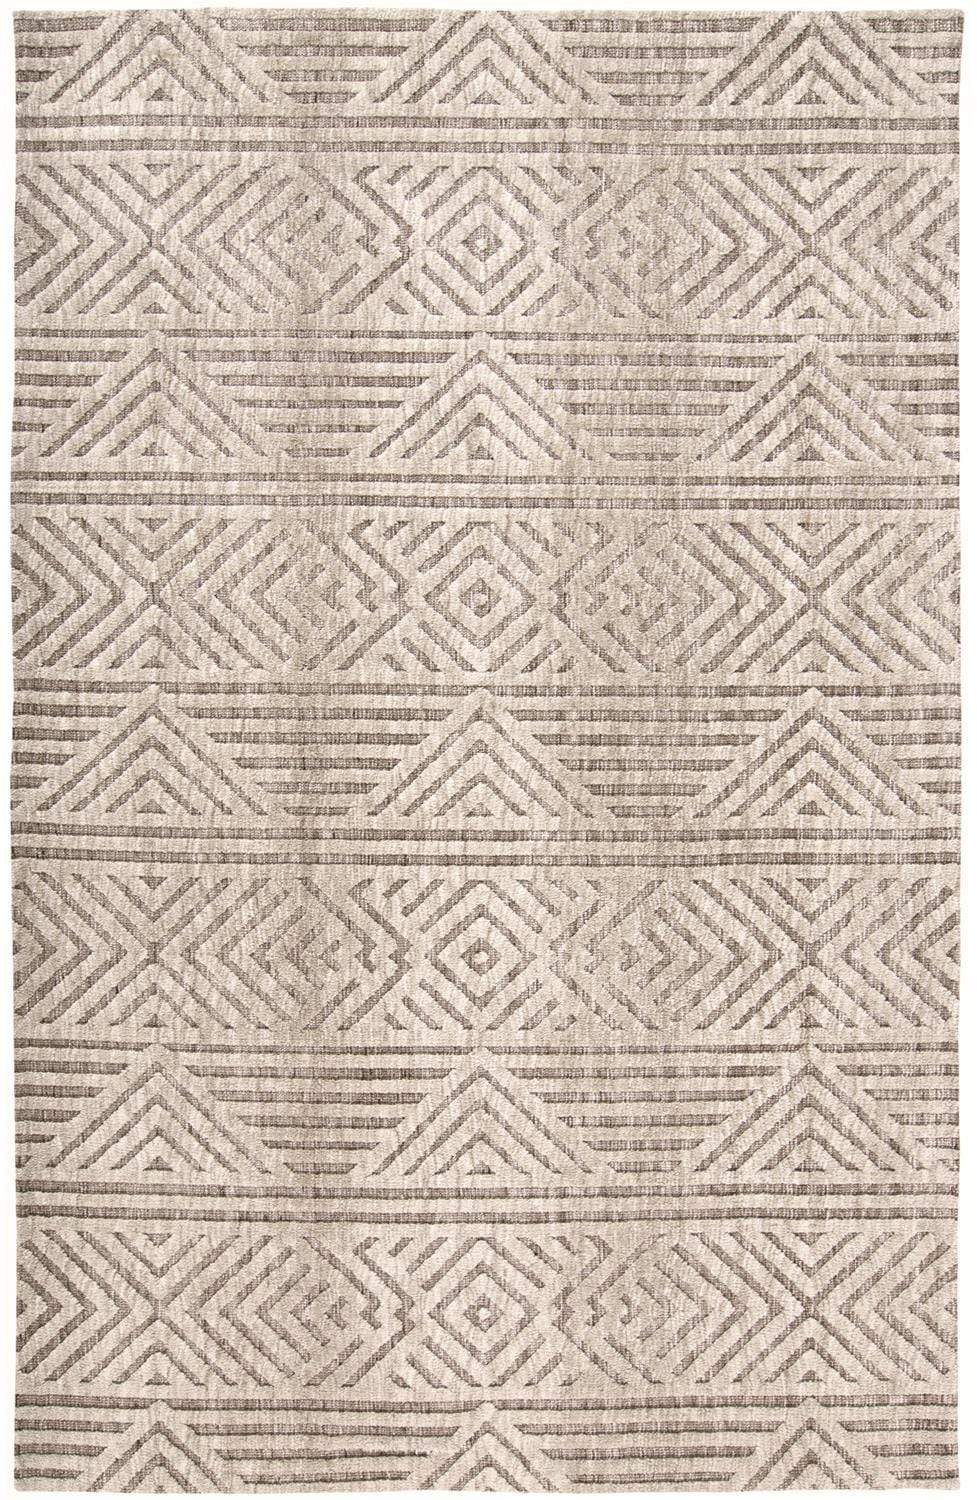 Feizy Feizy Colton Modern Diamond Art Deco Rug - Sand & Natural Tan - Available in 6 Sizes 3'-6" x 5'-6" 8748791FBRN000C50